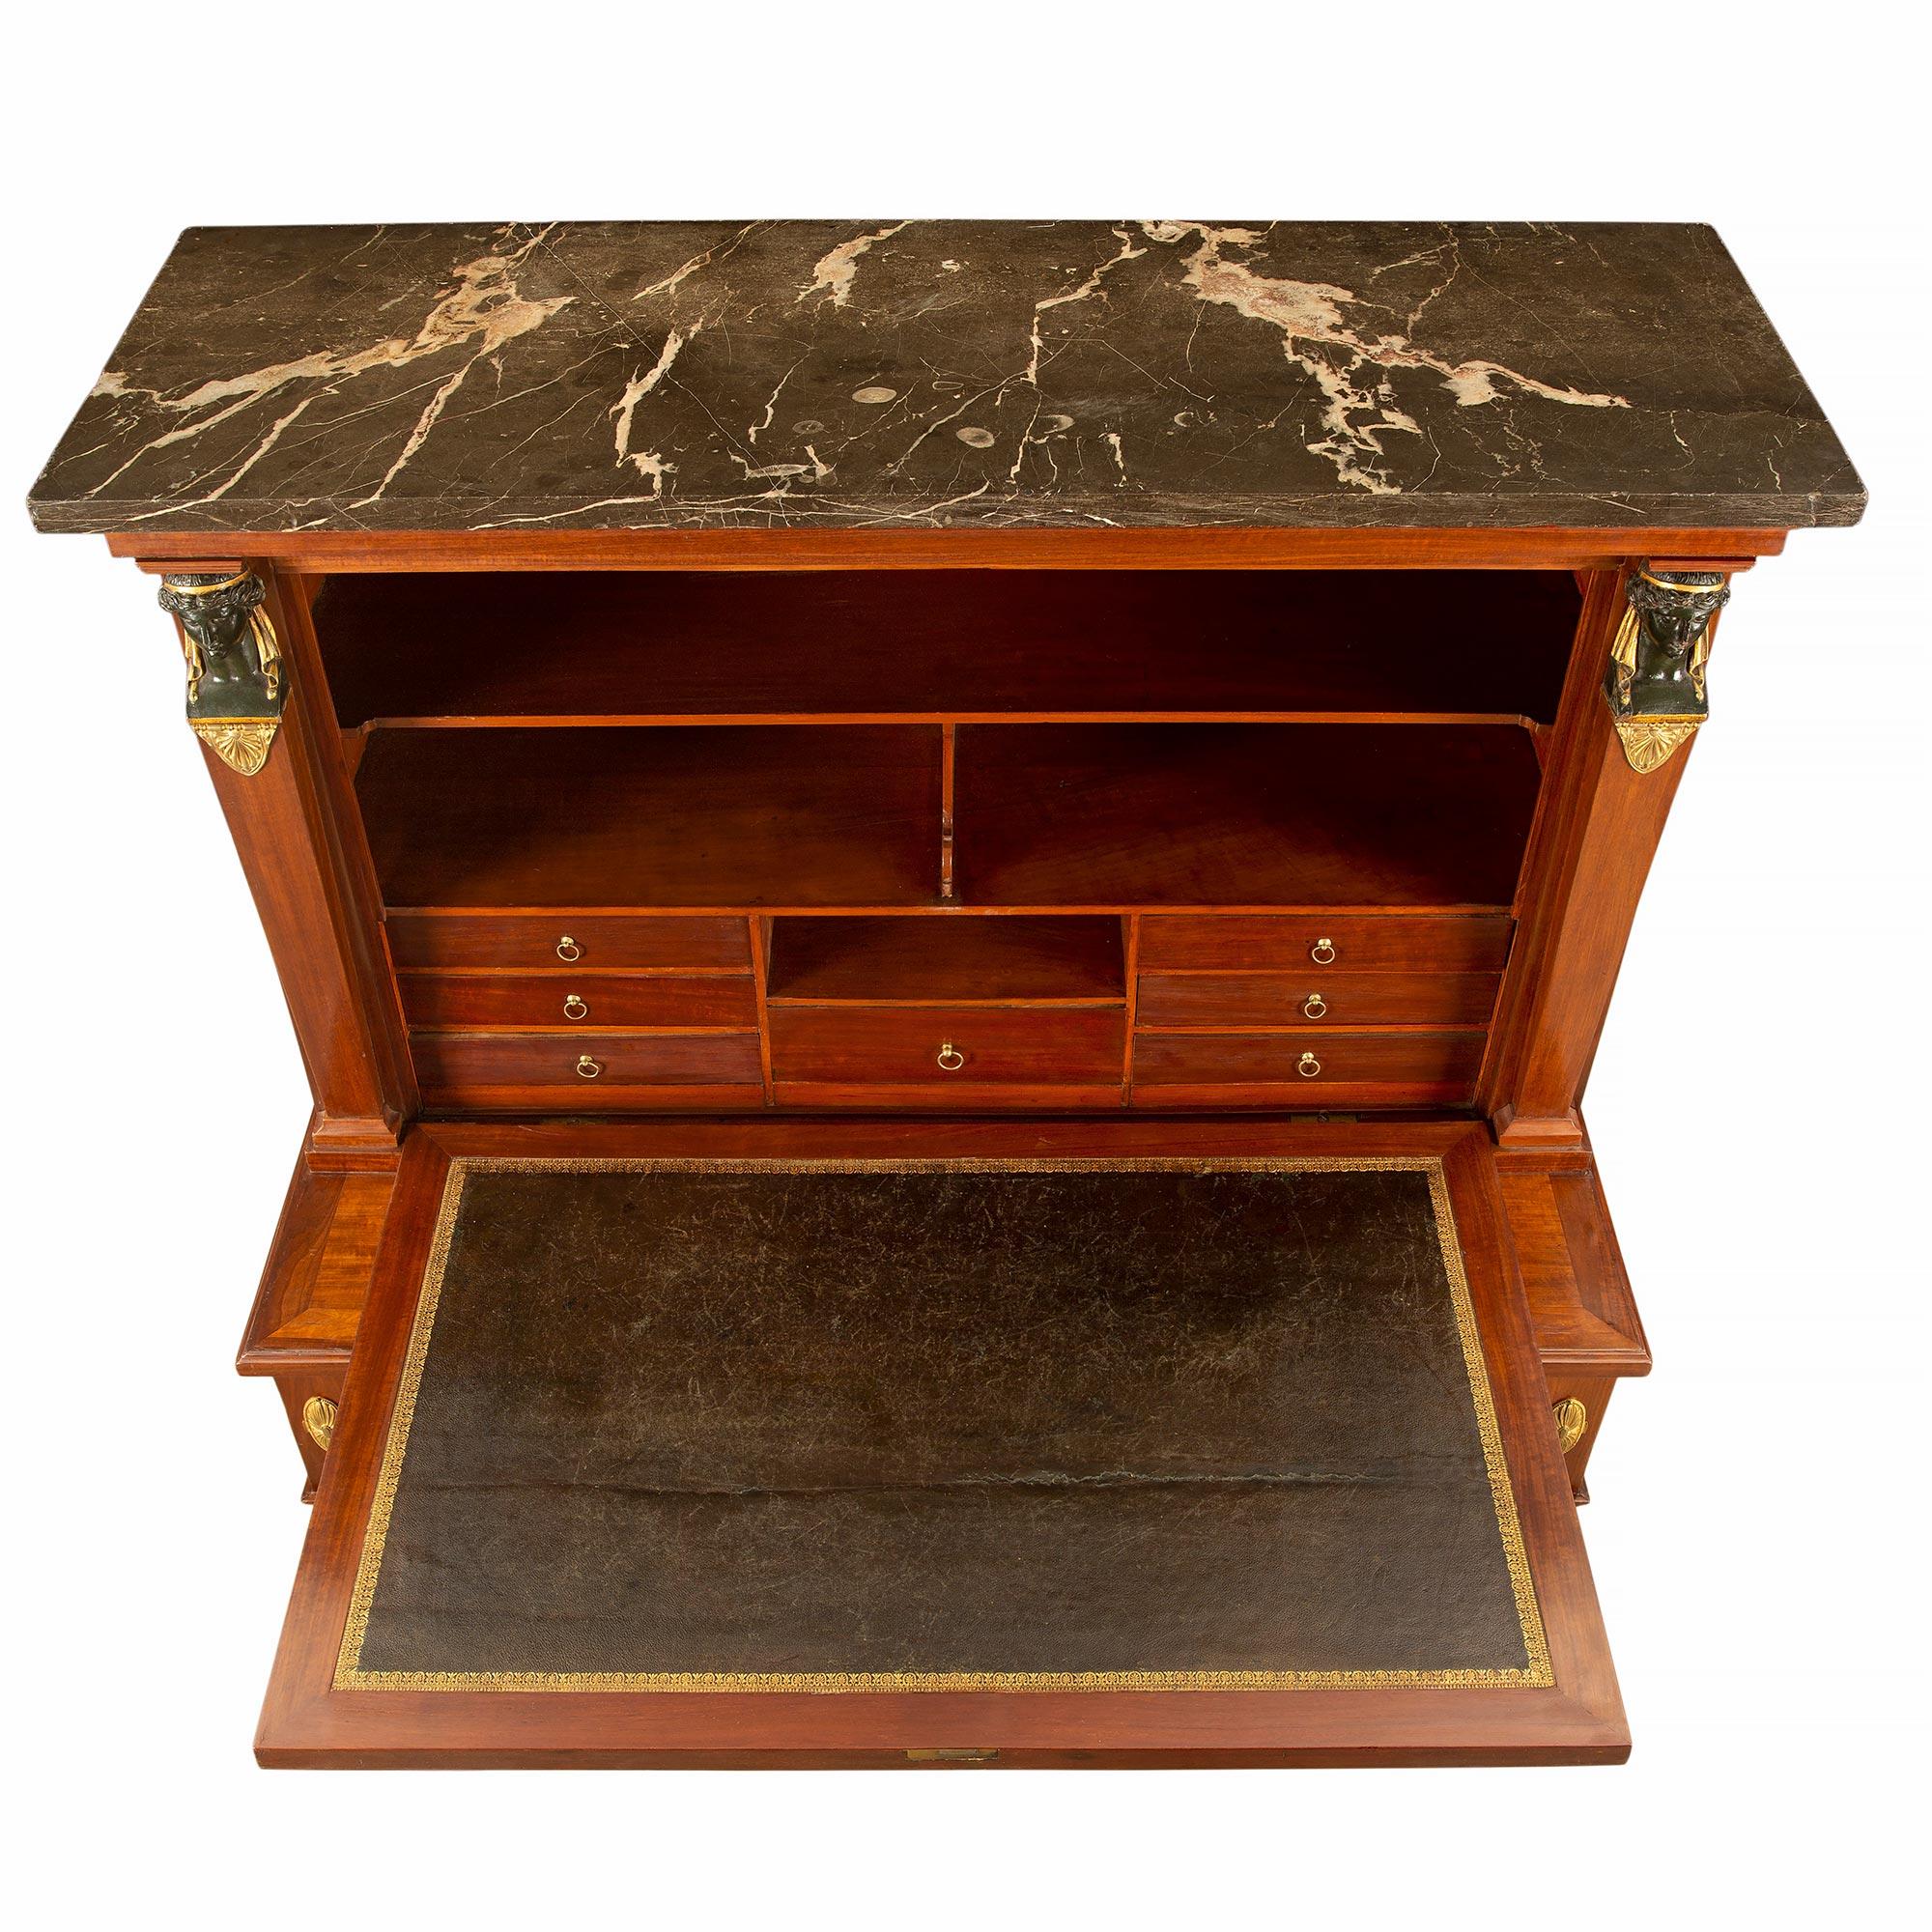 A most handsome Continental mid 19th century Empire st. mahogany, ormolu, patinated bronze and ebonized fruitwood drop front secretary. The secretary is raised by four square tapered legs ending with ebonized fruitwood claw feet over a octagon